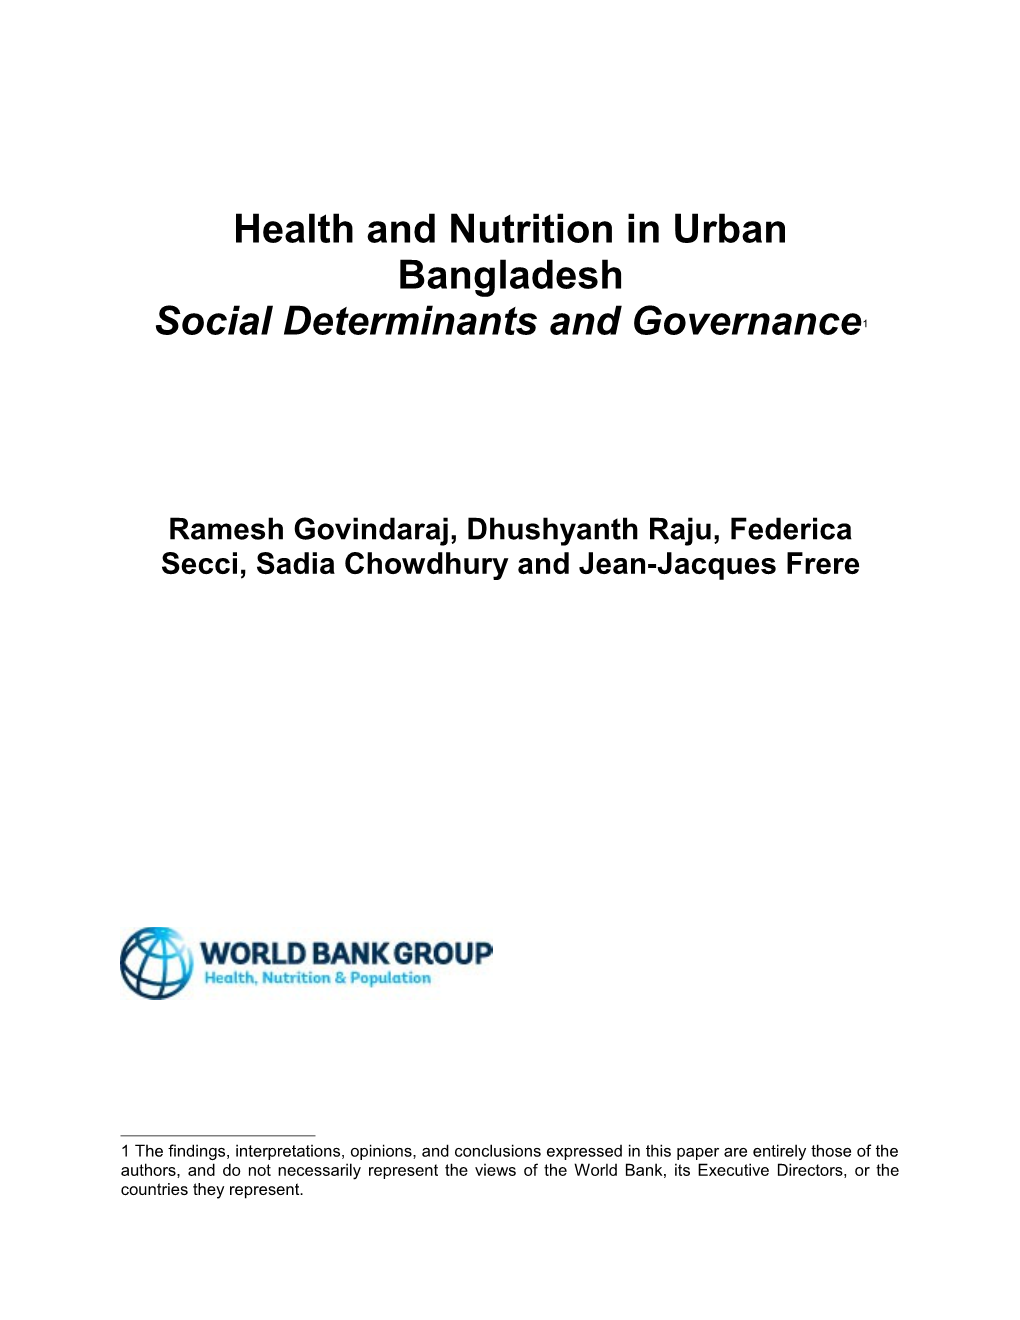 Health and Nutrition in Urban Bangladesh Social Determinants and Governance